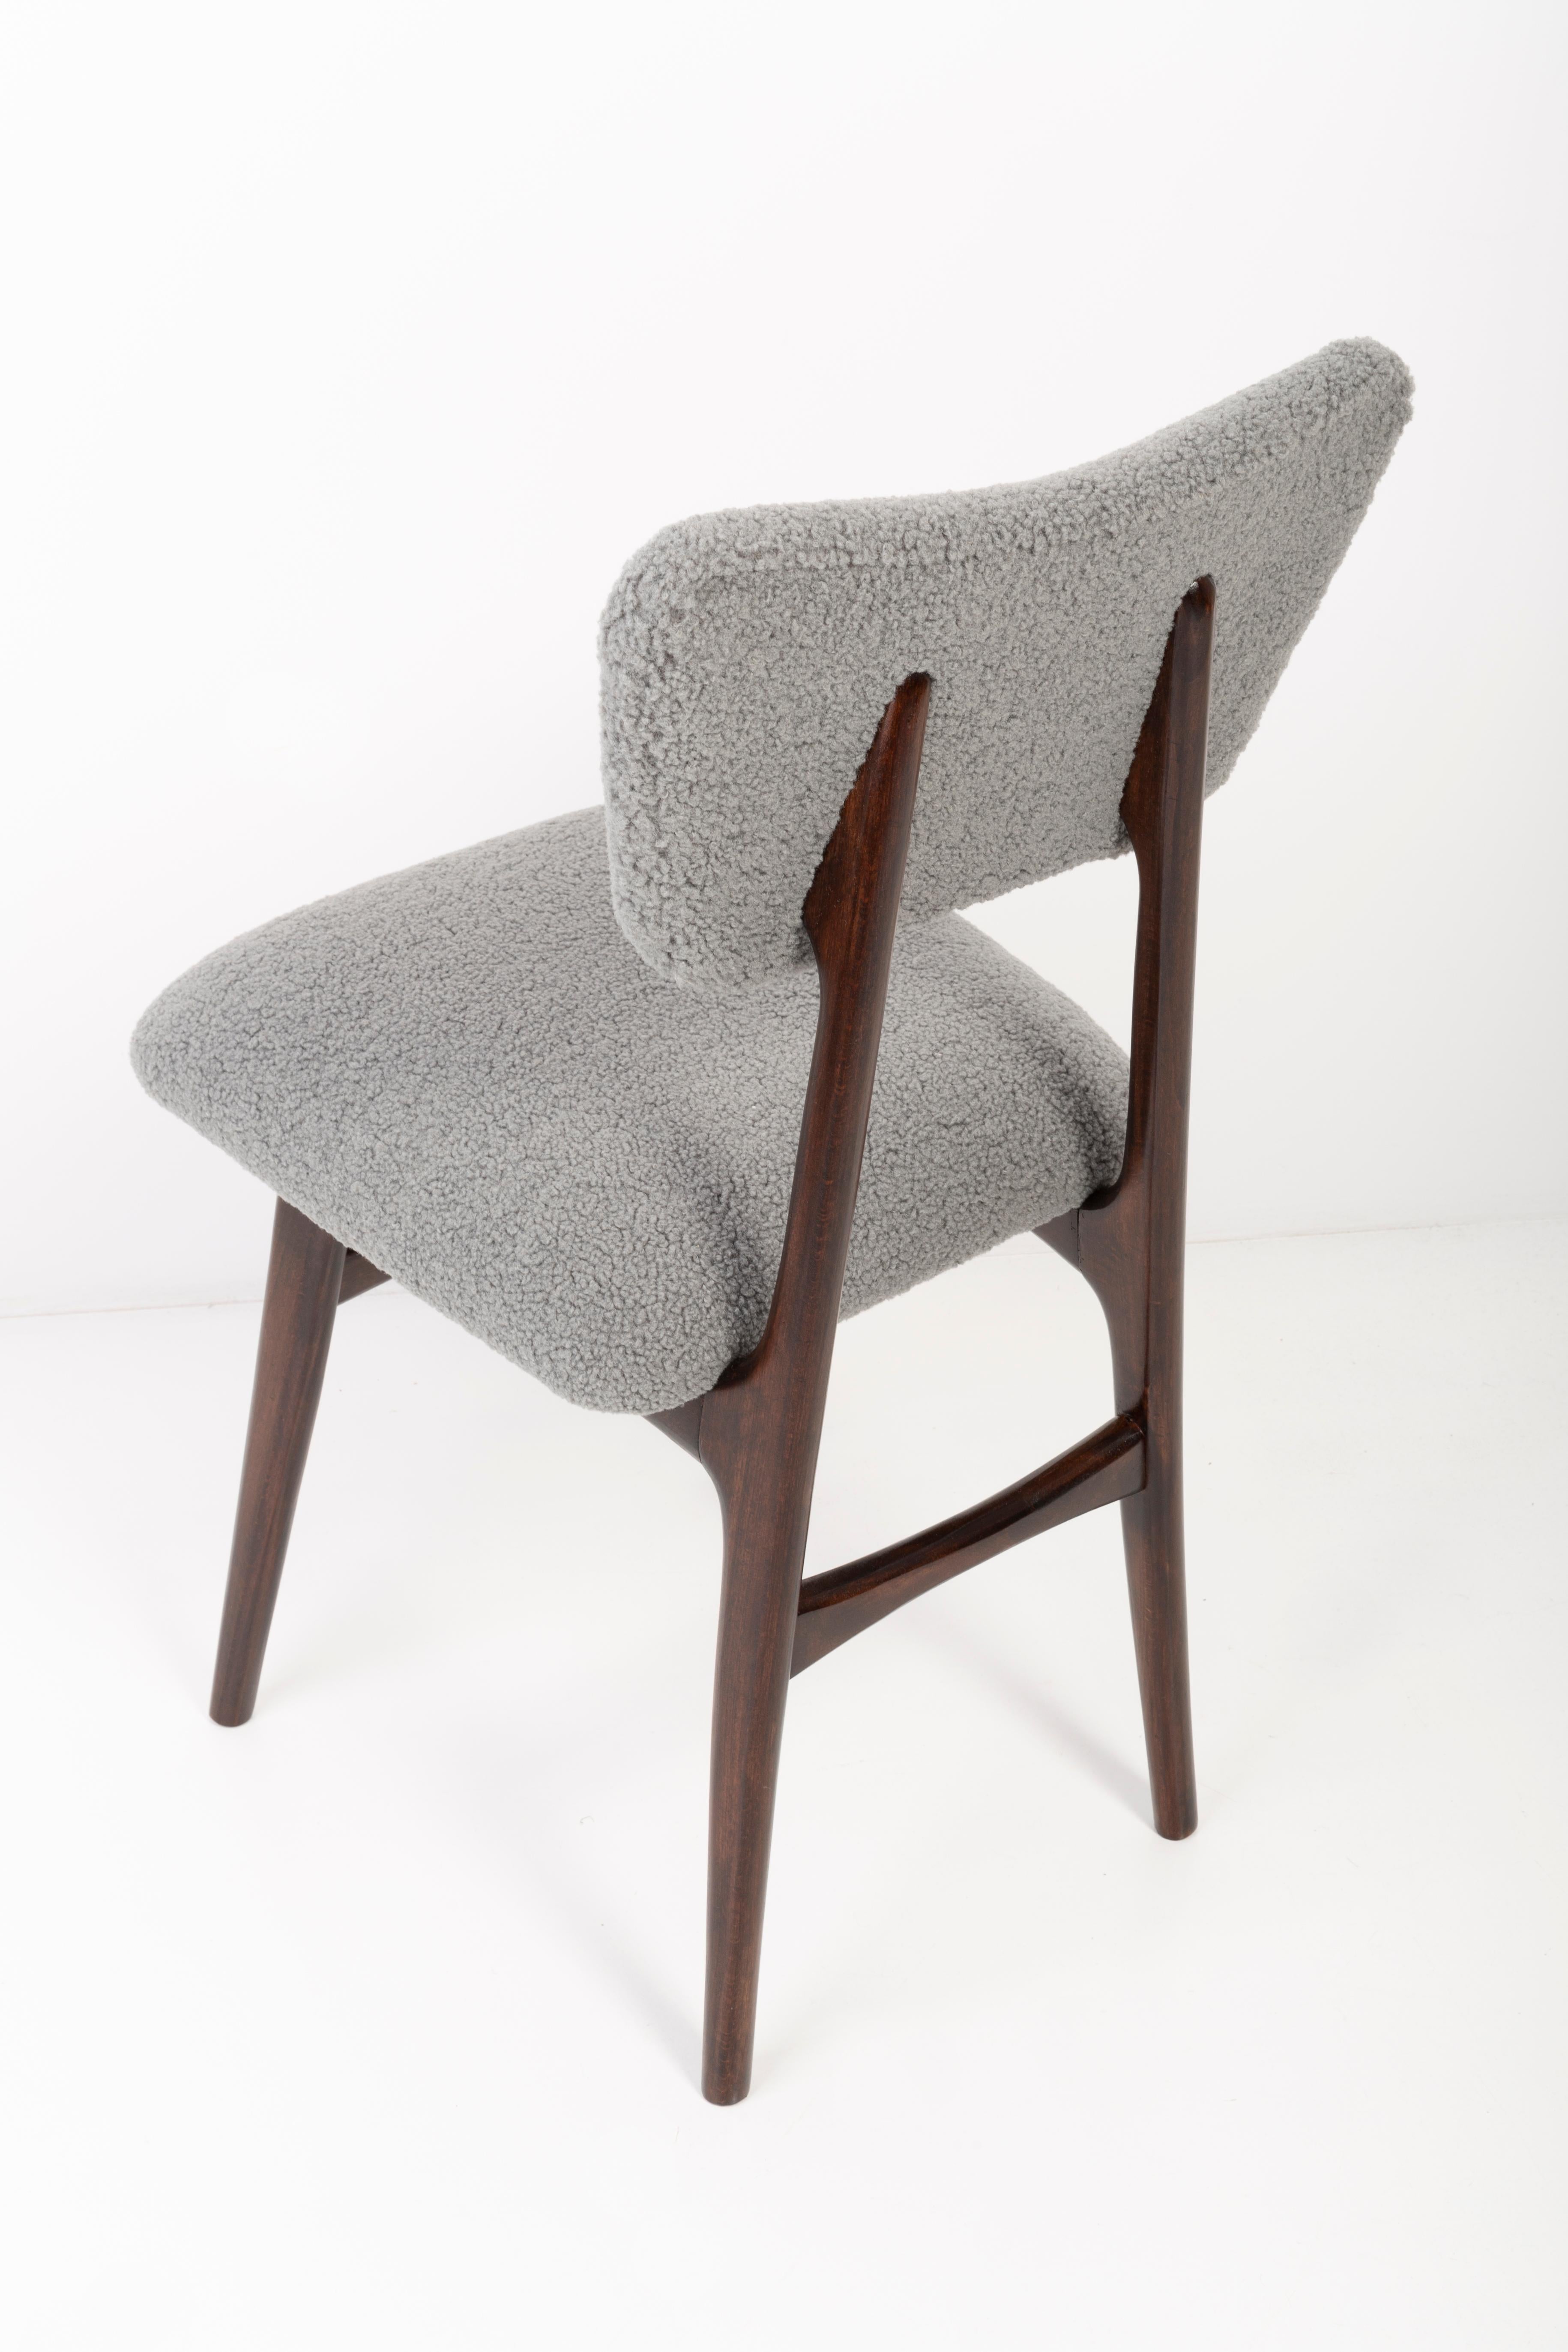 Set of Twelve 20th Century Gray Boucle Chairs, 1960s For Sale 4